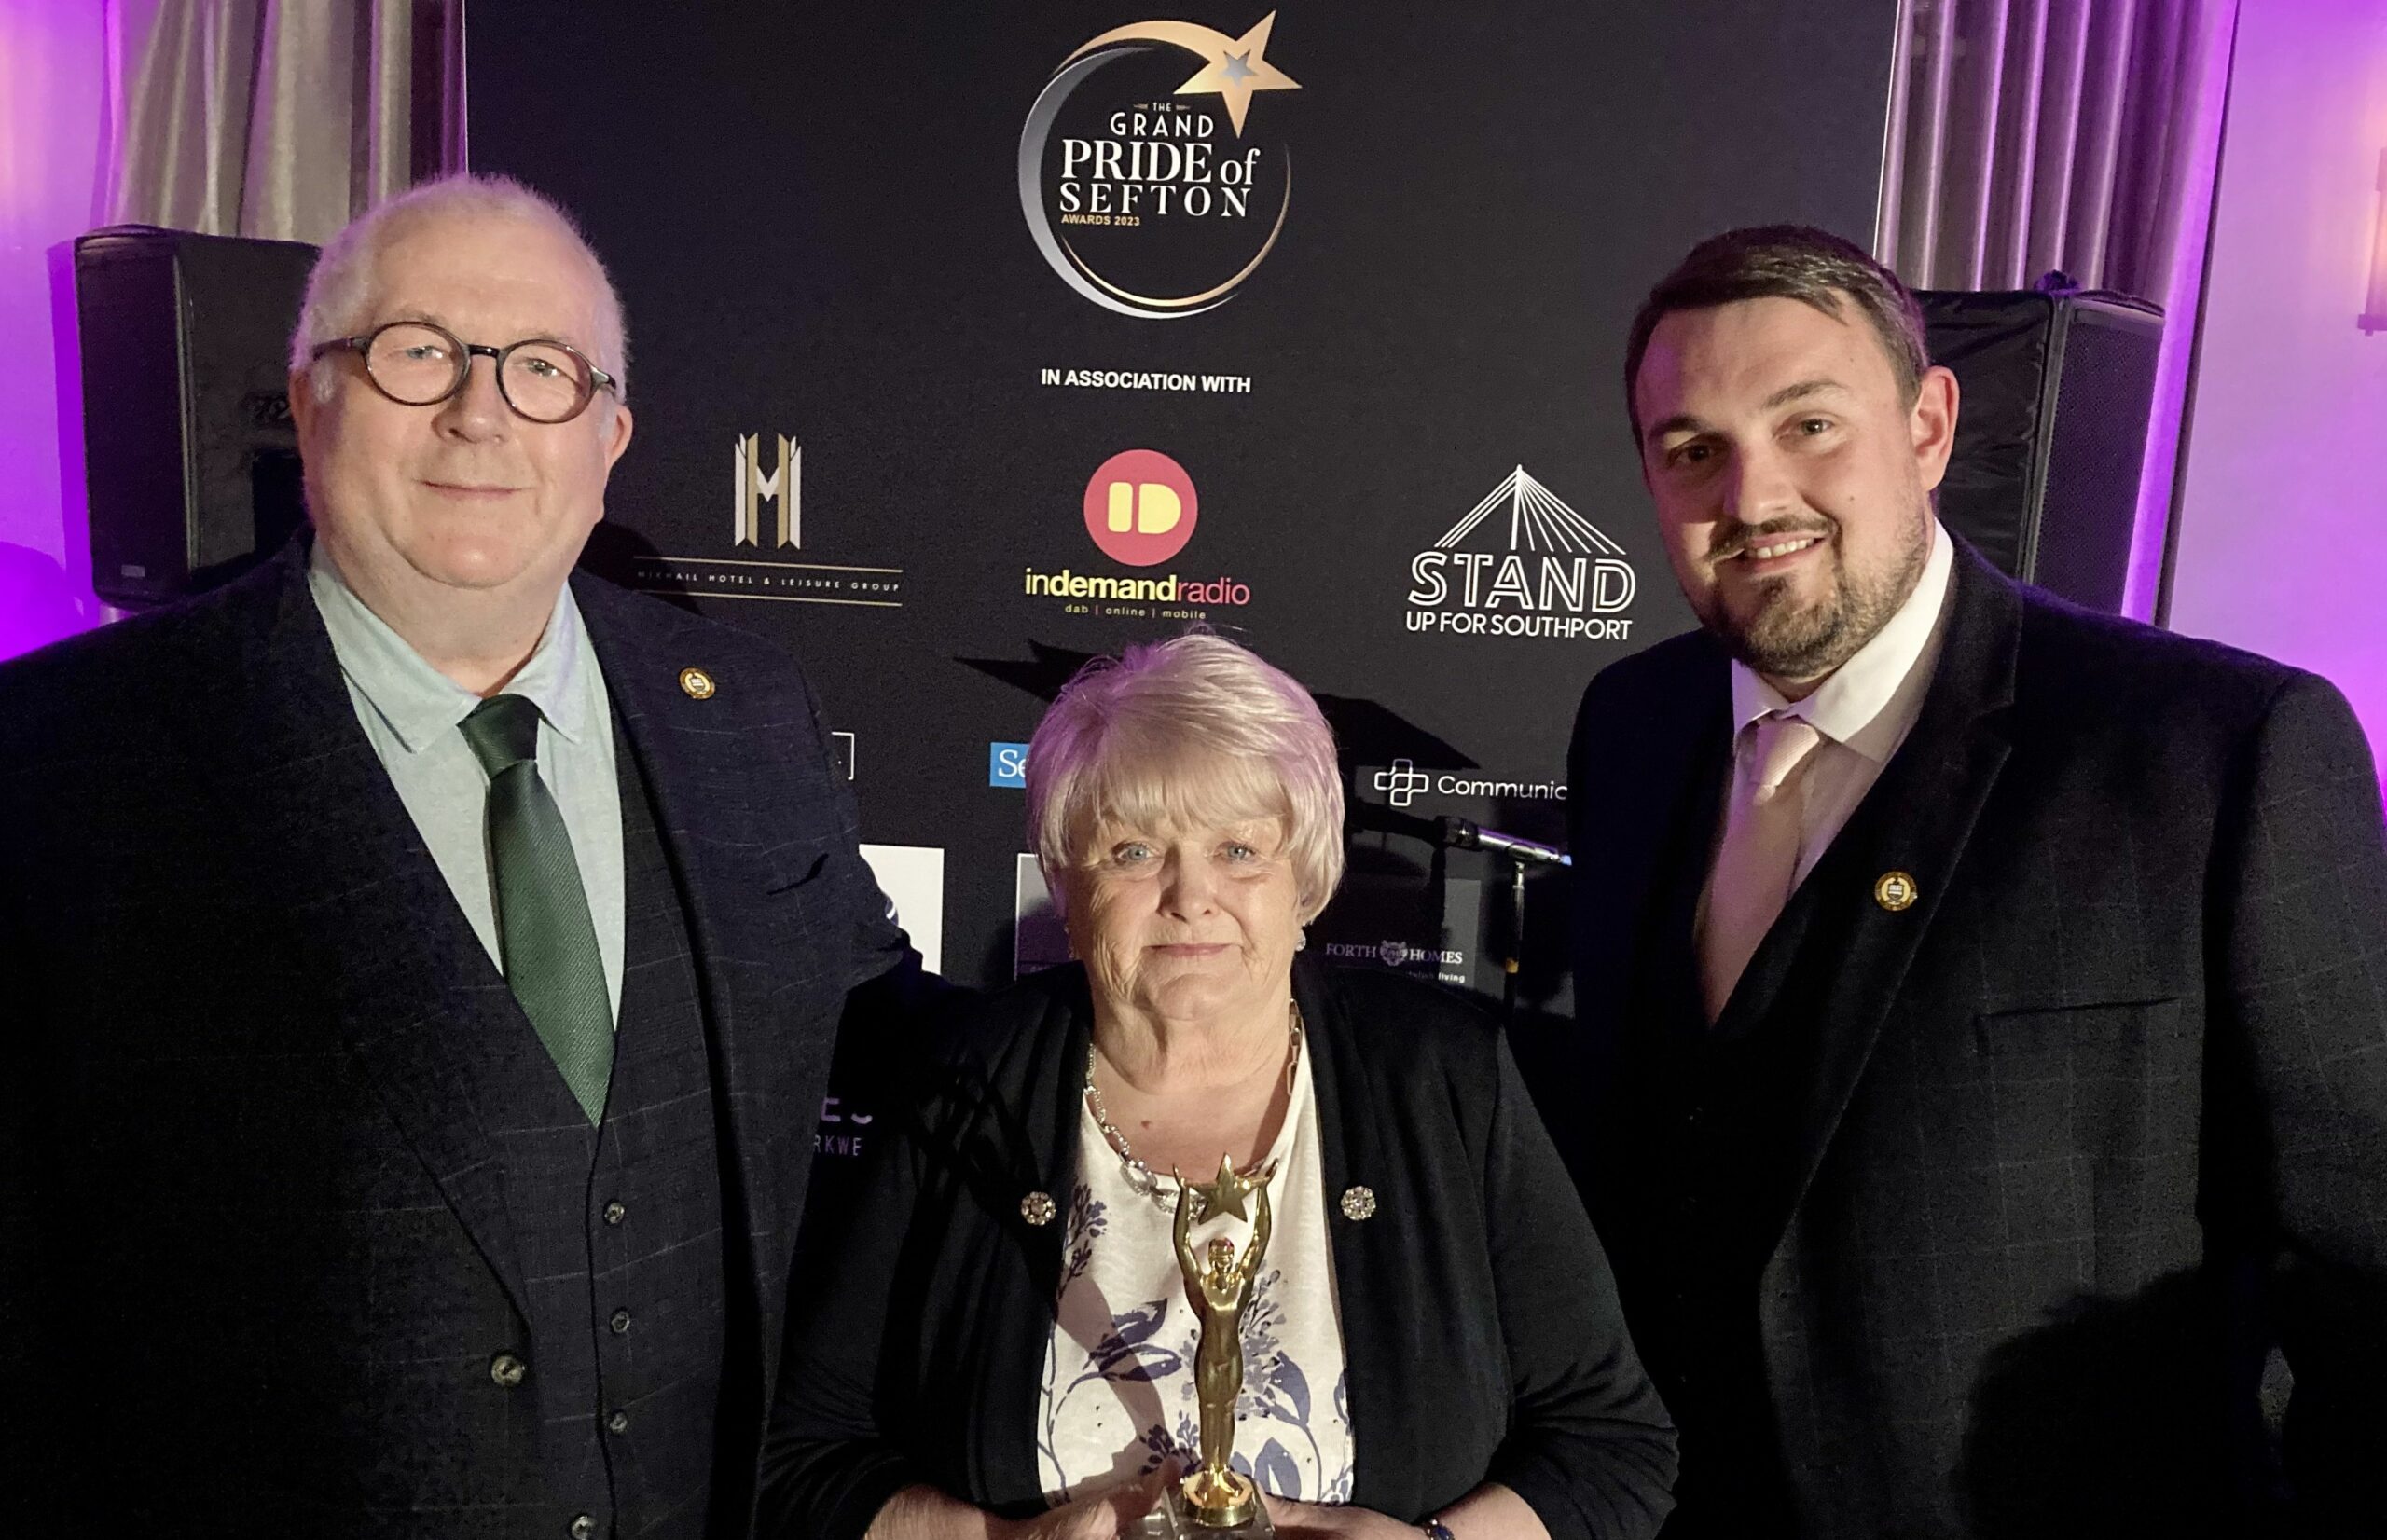 Kath Wilson of Southport Lifeboat (centre) won the main Pride of Sefton Award. She is pictured with Southport Lifeboat treasurer Tony D'Arcy Masters (left) and Southport Lifeboat Coxswain and Press Officer Nick Porter